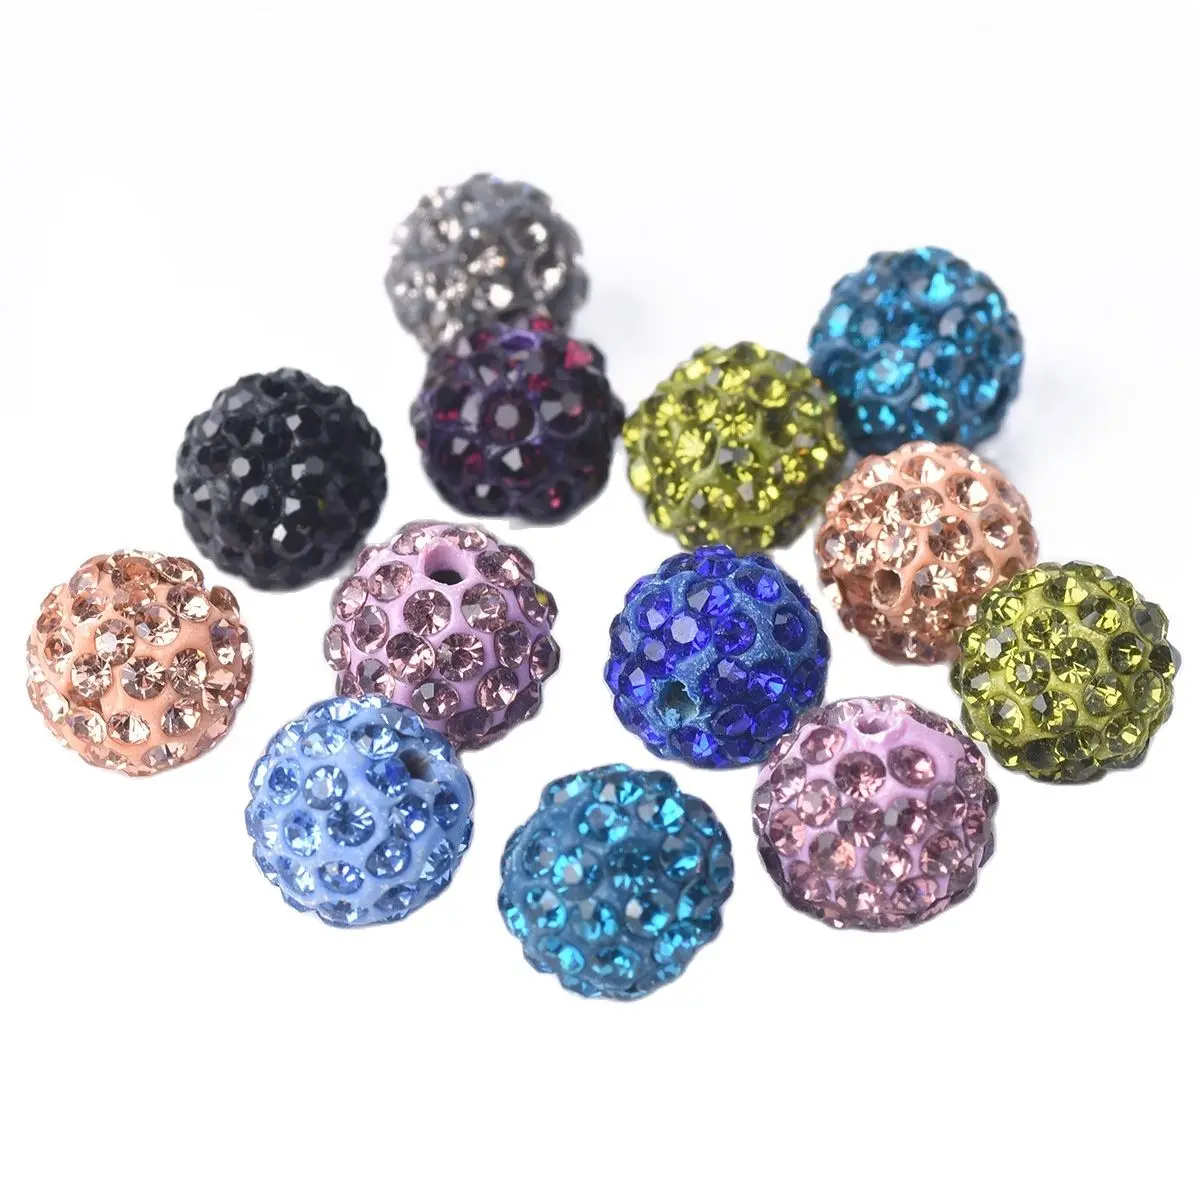 10pcs 10mm Random Mixed Colors Round Crystal Glass Ball & Cray Loose Beads for Jewelry Making DIY Crafts Findings 12 colors 26 english letters mixed chunky glitter for diy epoxy resin crafts festival sequins 517f